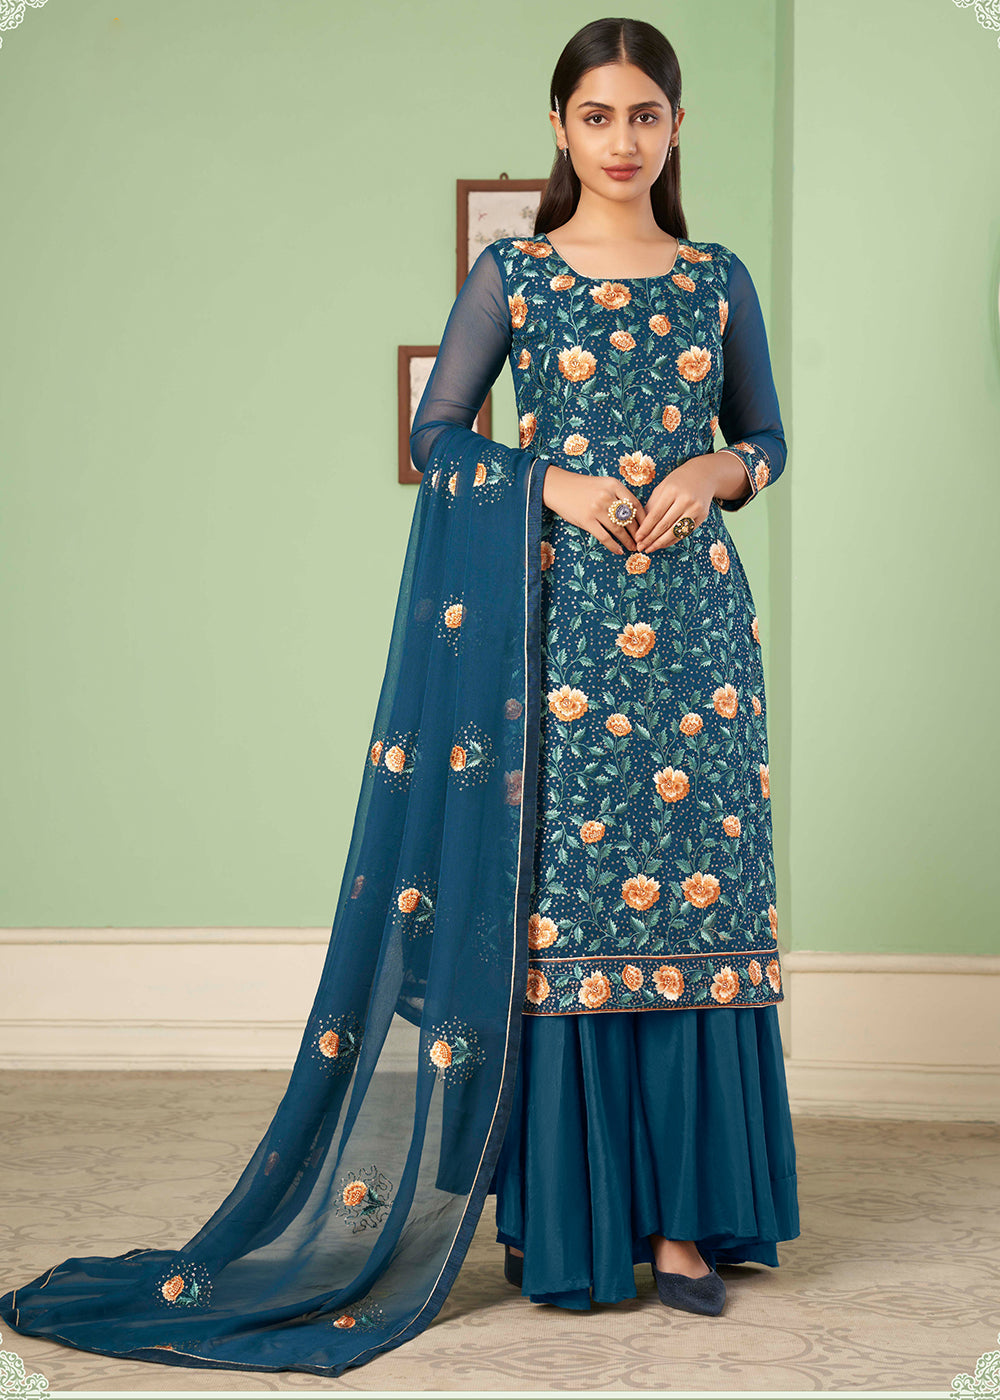 Buy Now Multi Thread Brilliant Teal Georgette Palazzo Salwar Suit Online in USA, UK, Canada & Worldwide at Empress Clothing. 